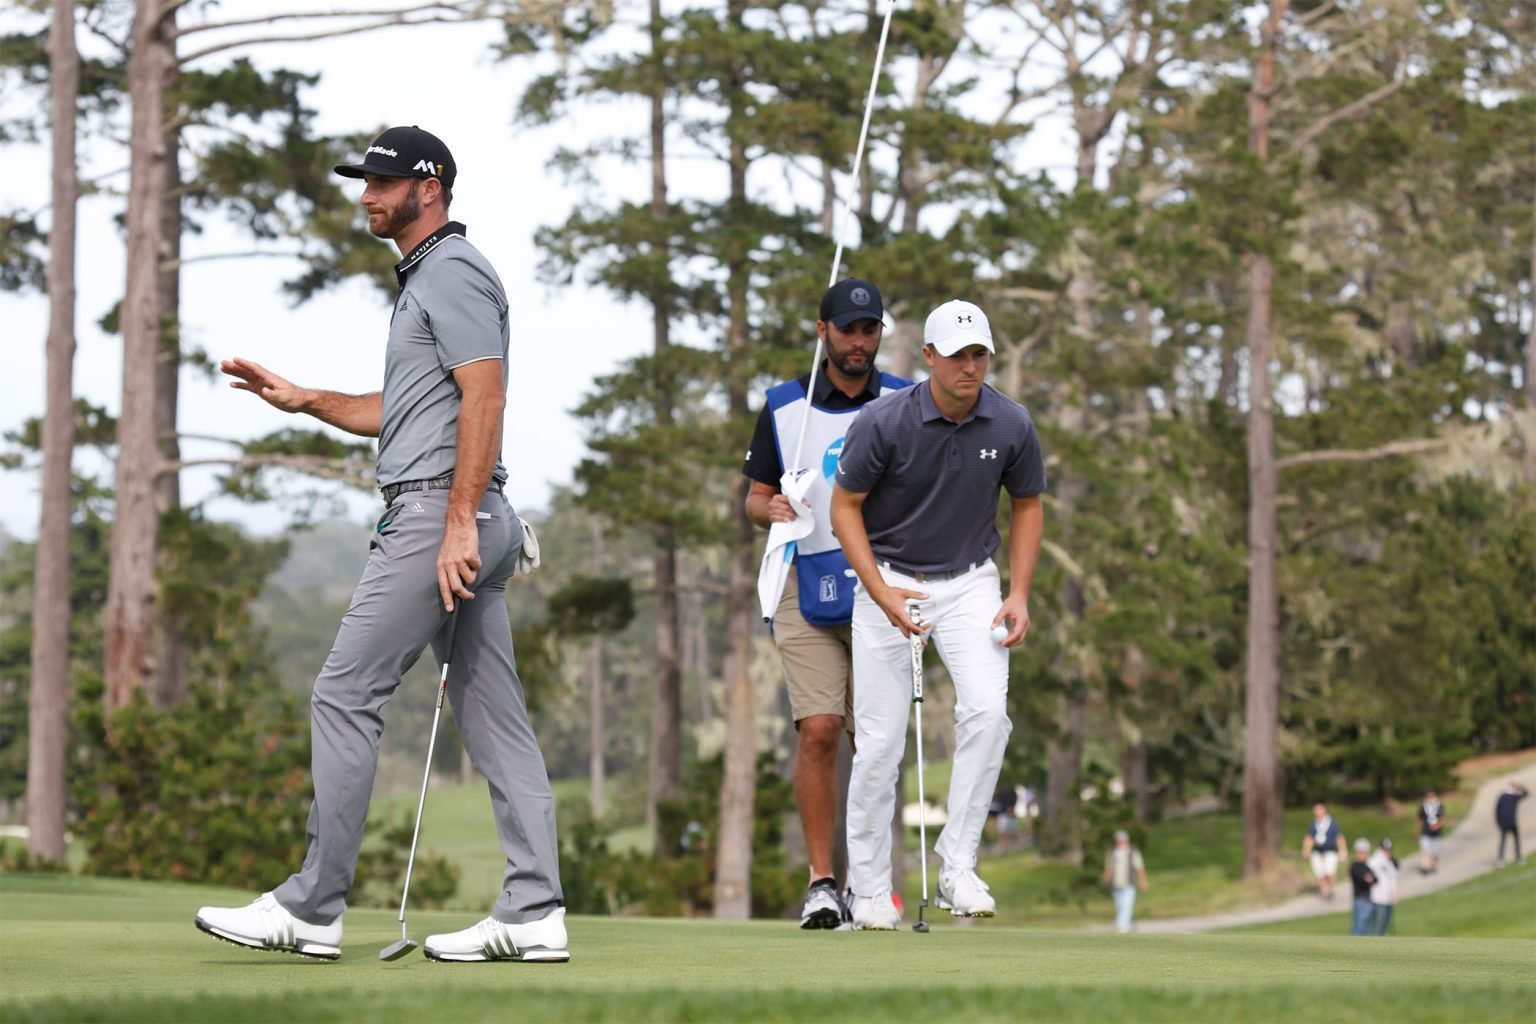 Golfers at the AT&T Pebble Beach Pro Am